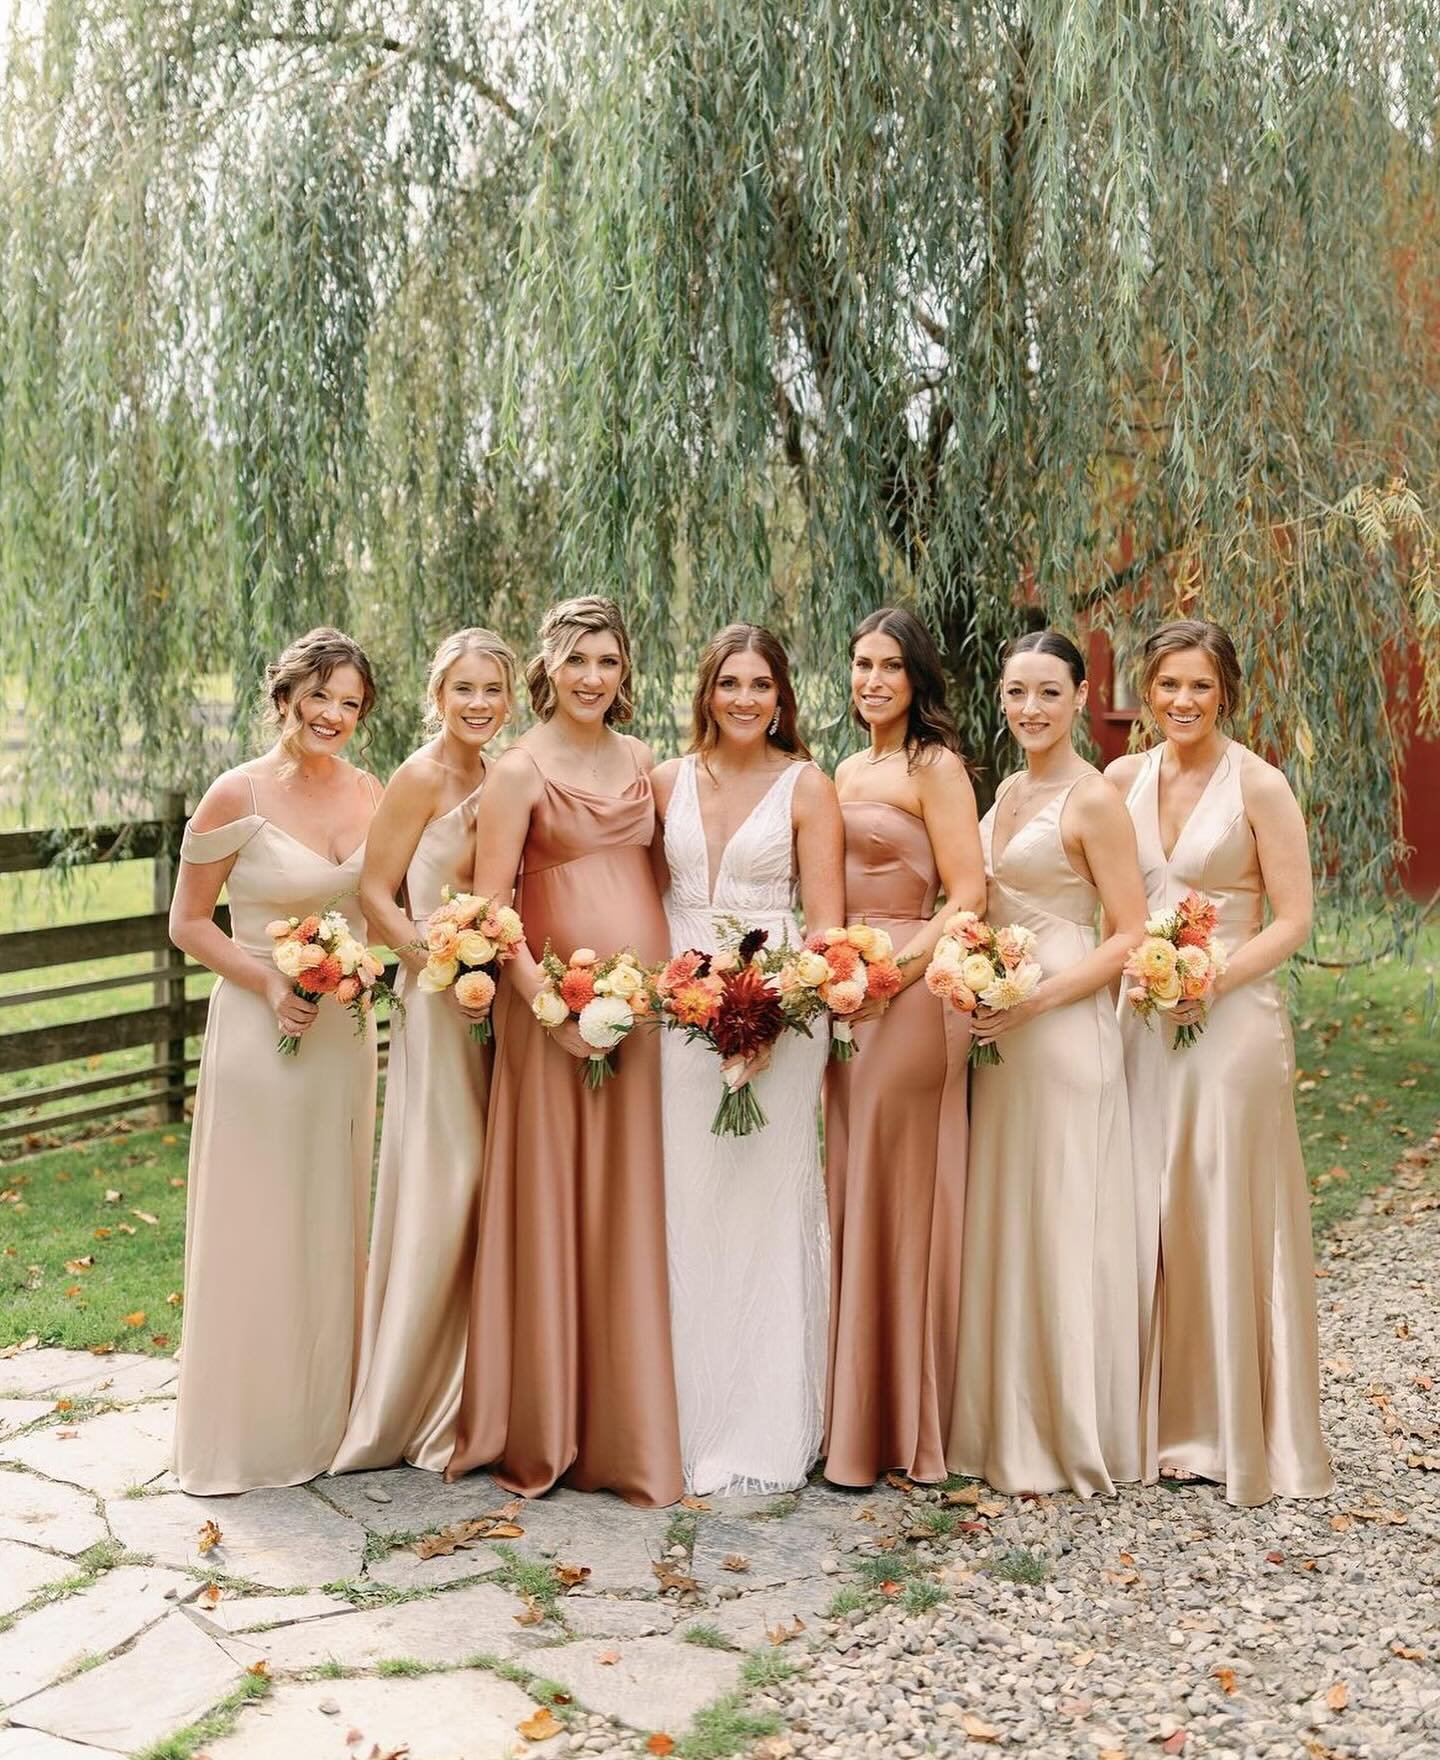 What&rsquo;s 3 blocks away and cute all over? 

Our sister shop @styledbylilysaratoga! If you&rsquo;re looking for bridesmaid dresses, mother of the bride/groom gowns, or formal wear&hellip; They&rsquo;re your shop! 

Bridesmaid Dresses: @styledbylil